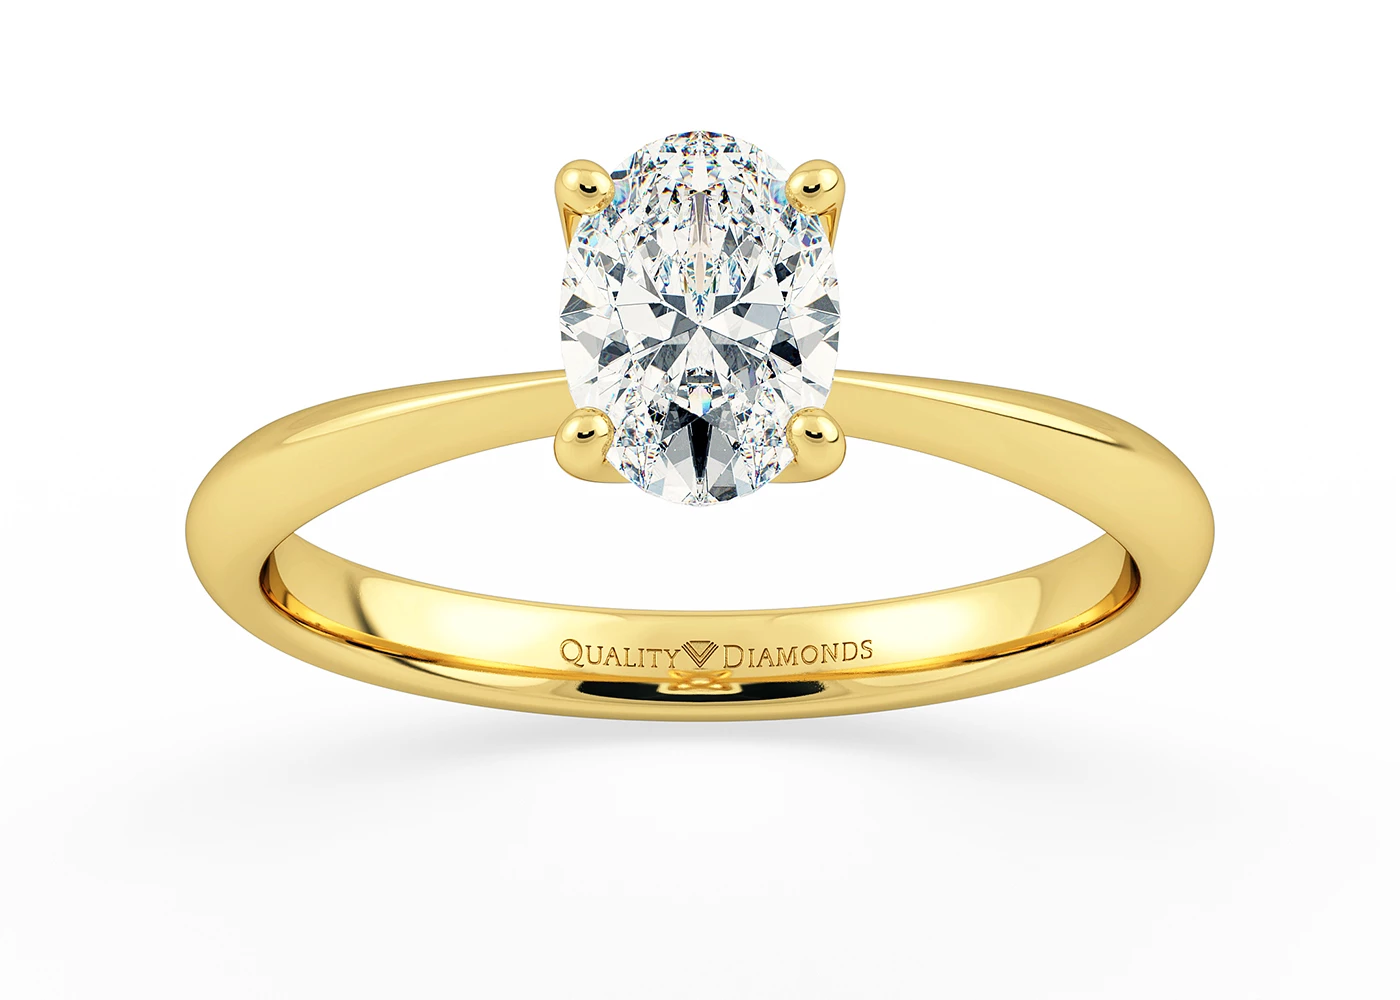 Oval Amorette Diamond Ring in 9K Yellow Gold